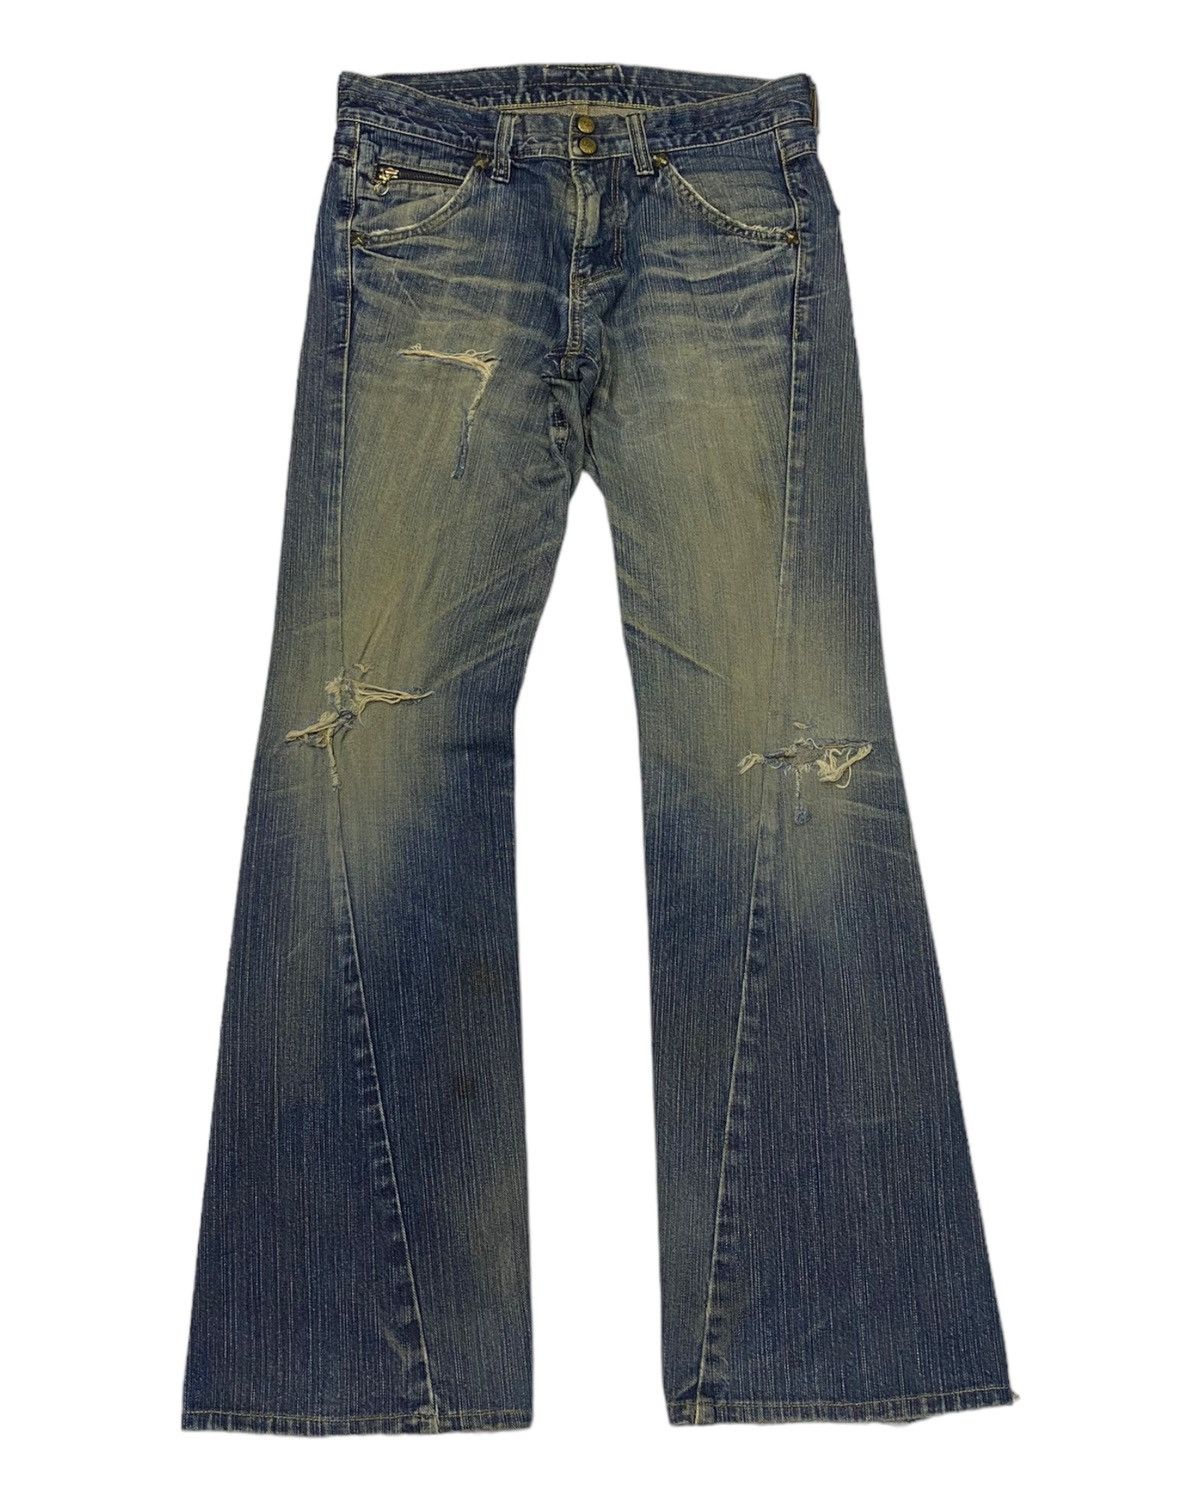 🔥LEE FLARE TWISTED DISTRESSED DENIM JEANS BOOTCUT FLARED - 7